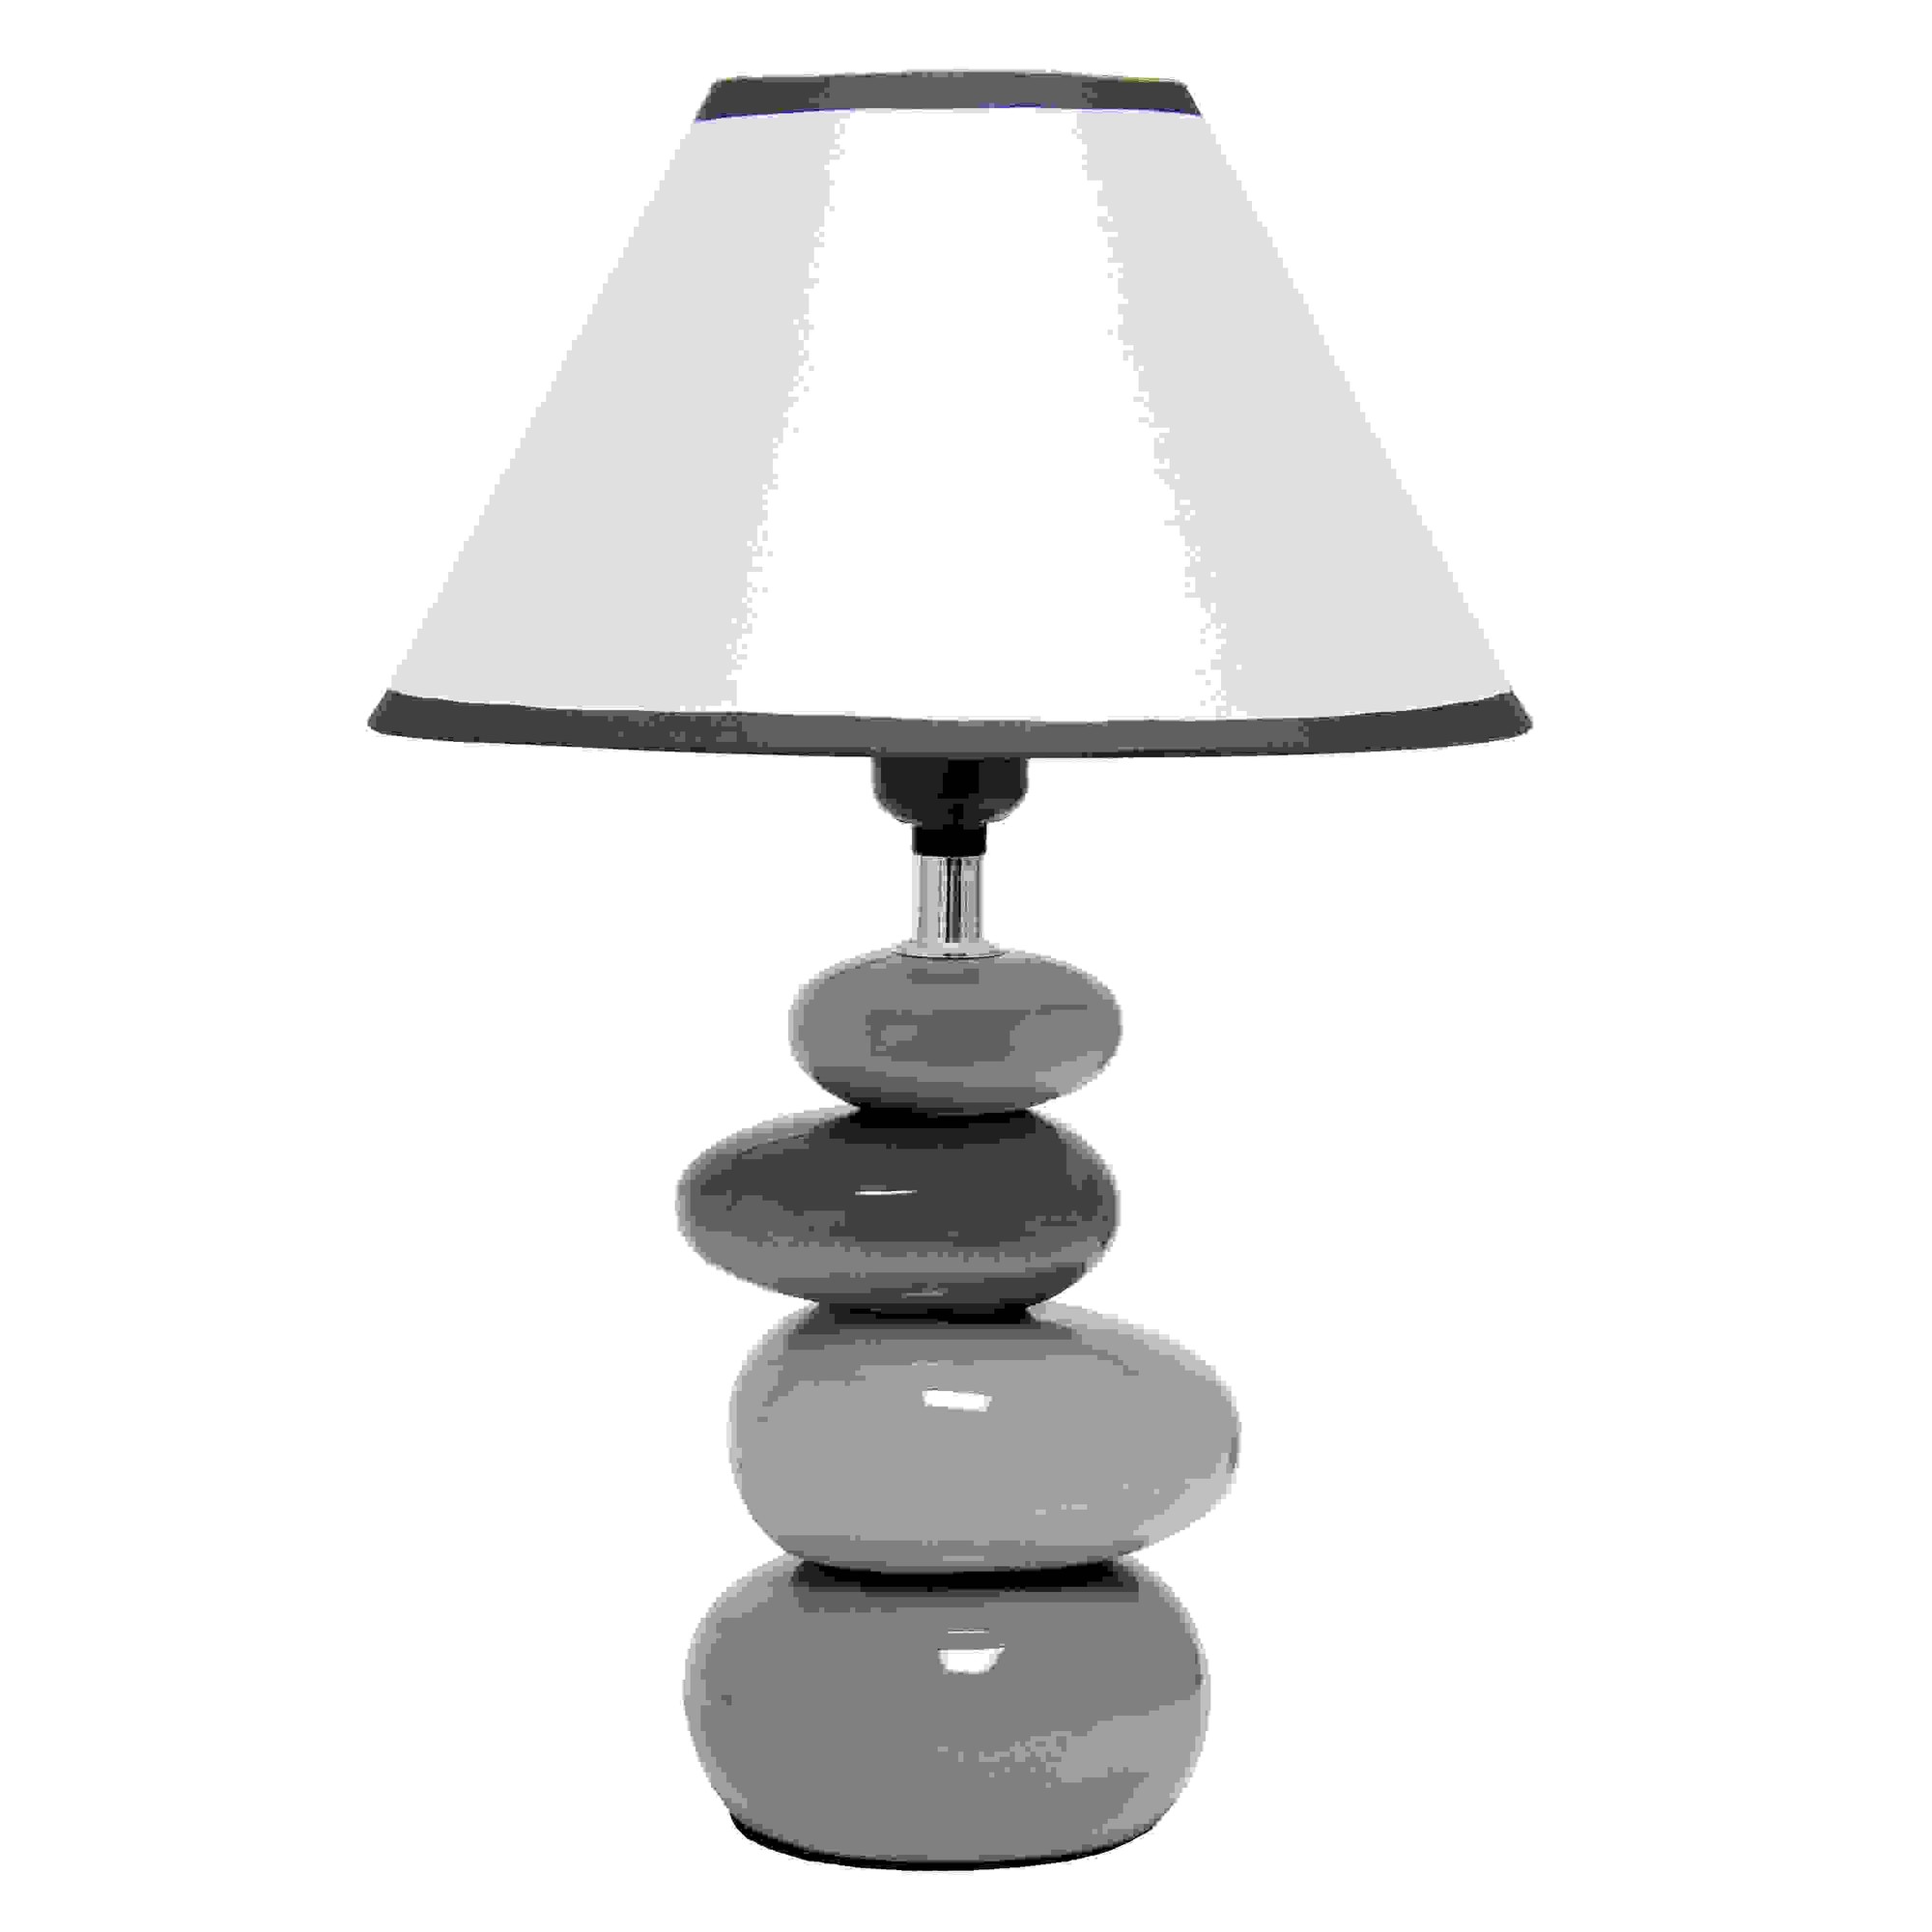 Simple Designs Shades of Gray Ceramic Stone Table Lamp